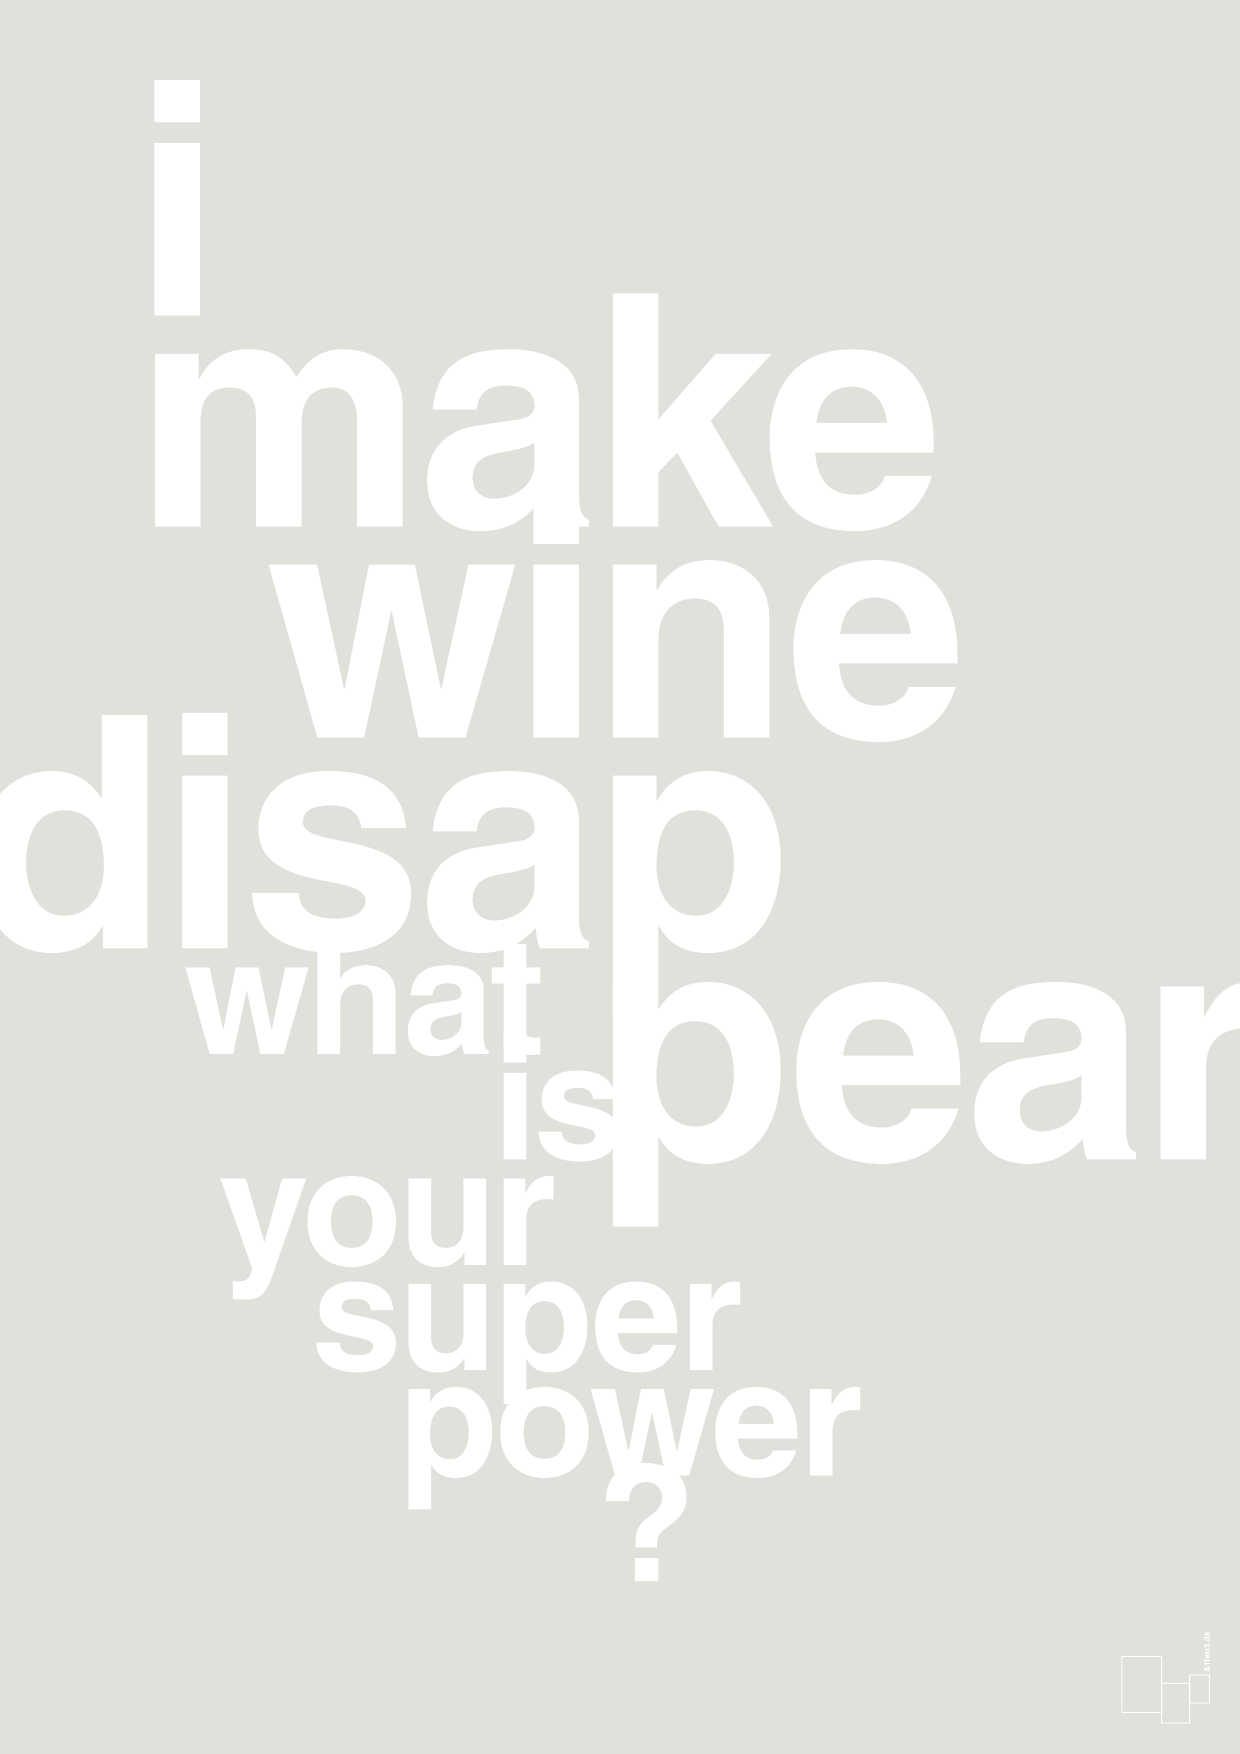 i make wine disappear what is your super power - Plakat med Mad & Drikke i Painters White